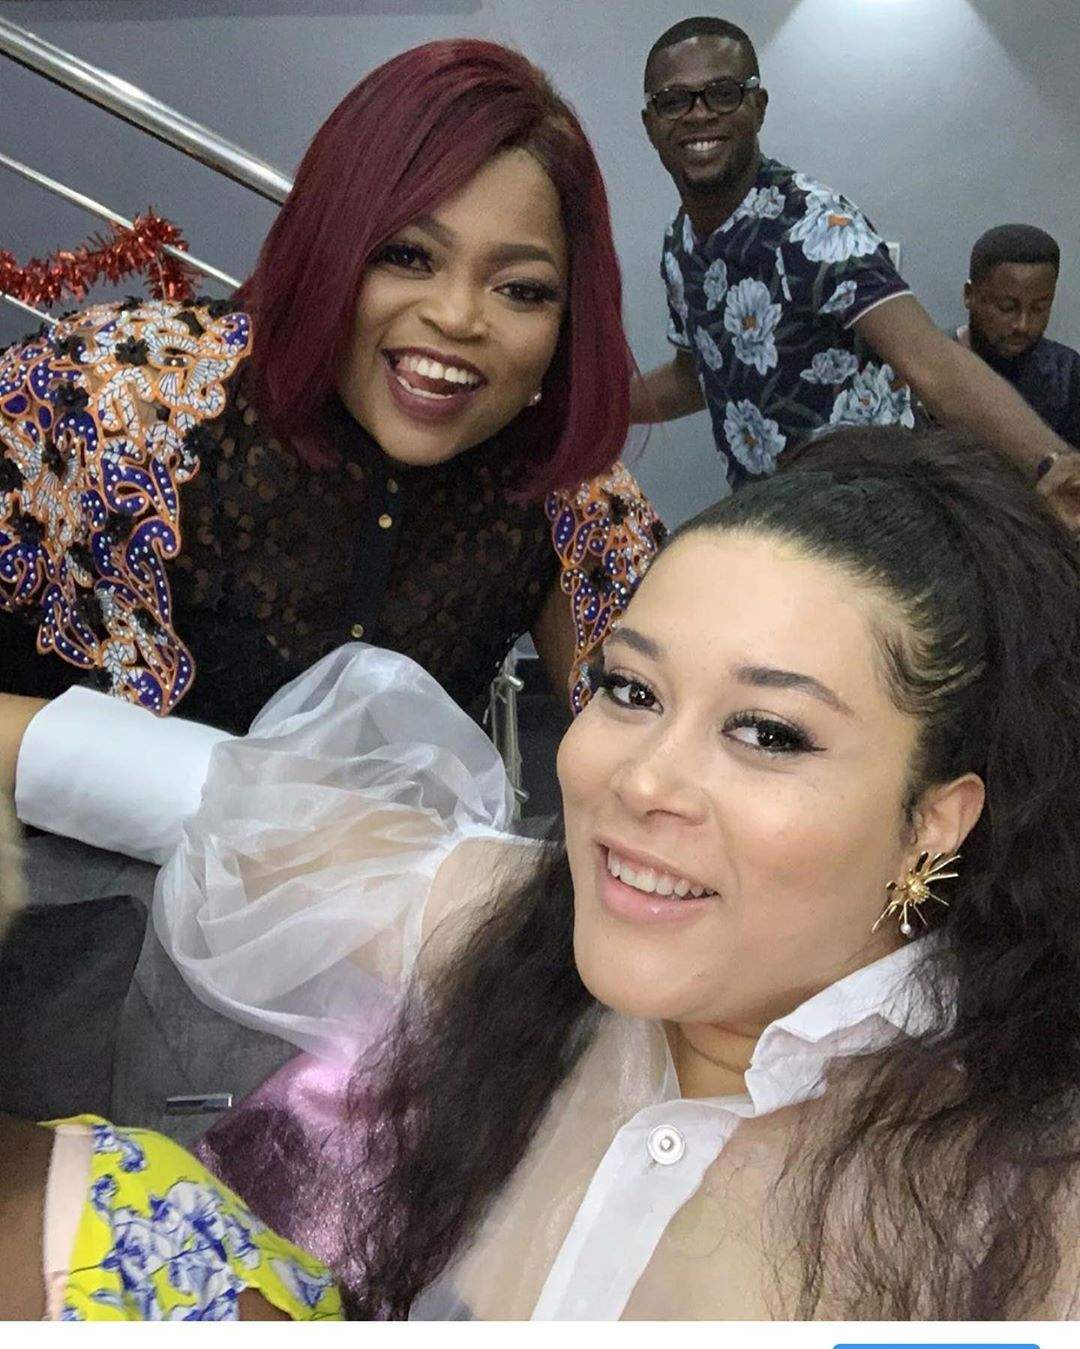 'No one is above the law' - Adunni Ade reacts to Funke Akindele's arraignment